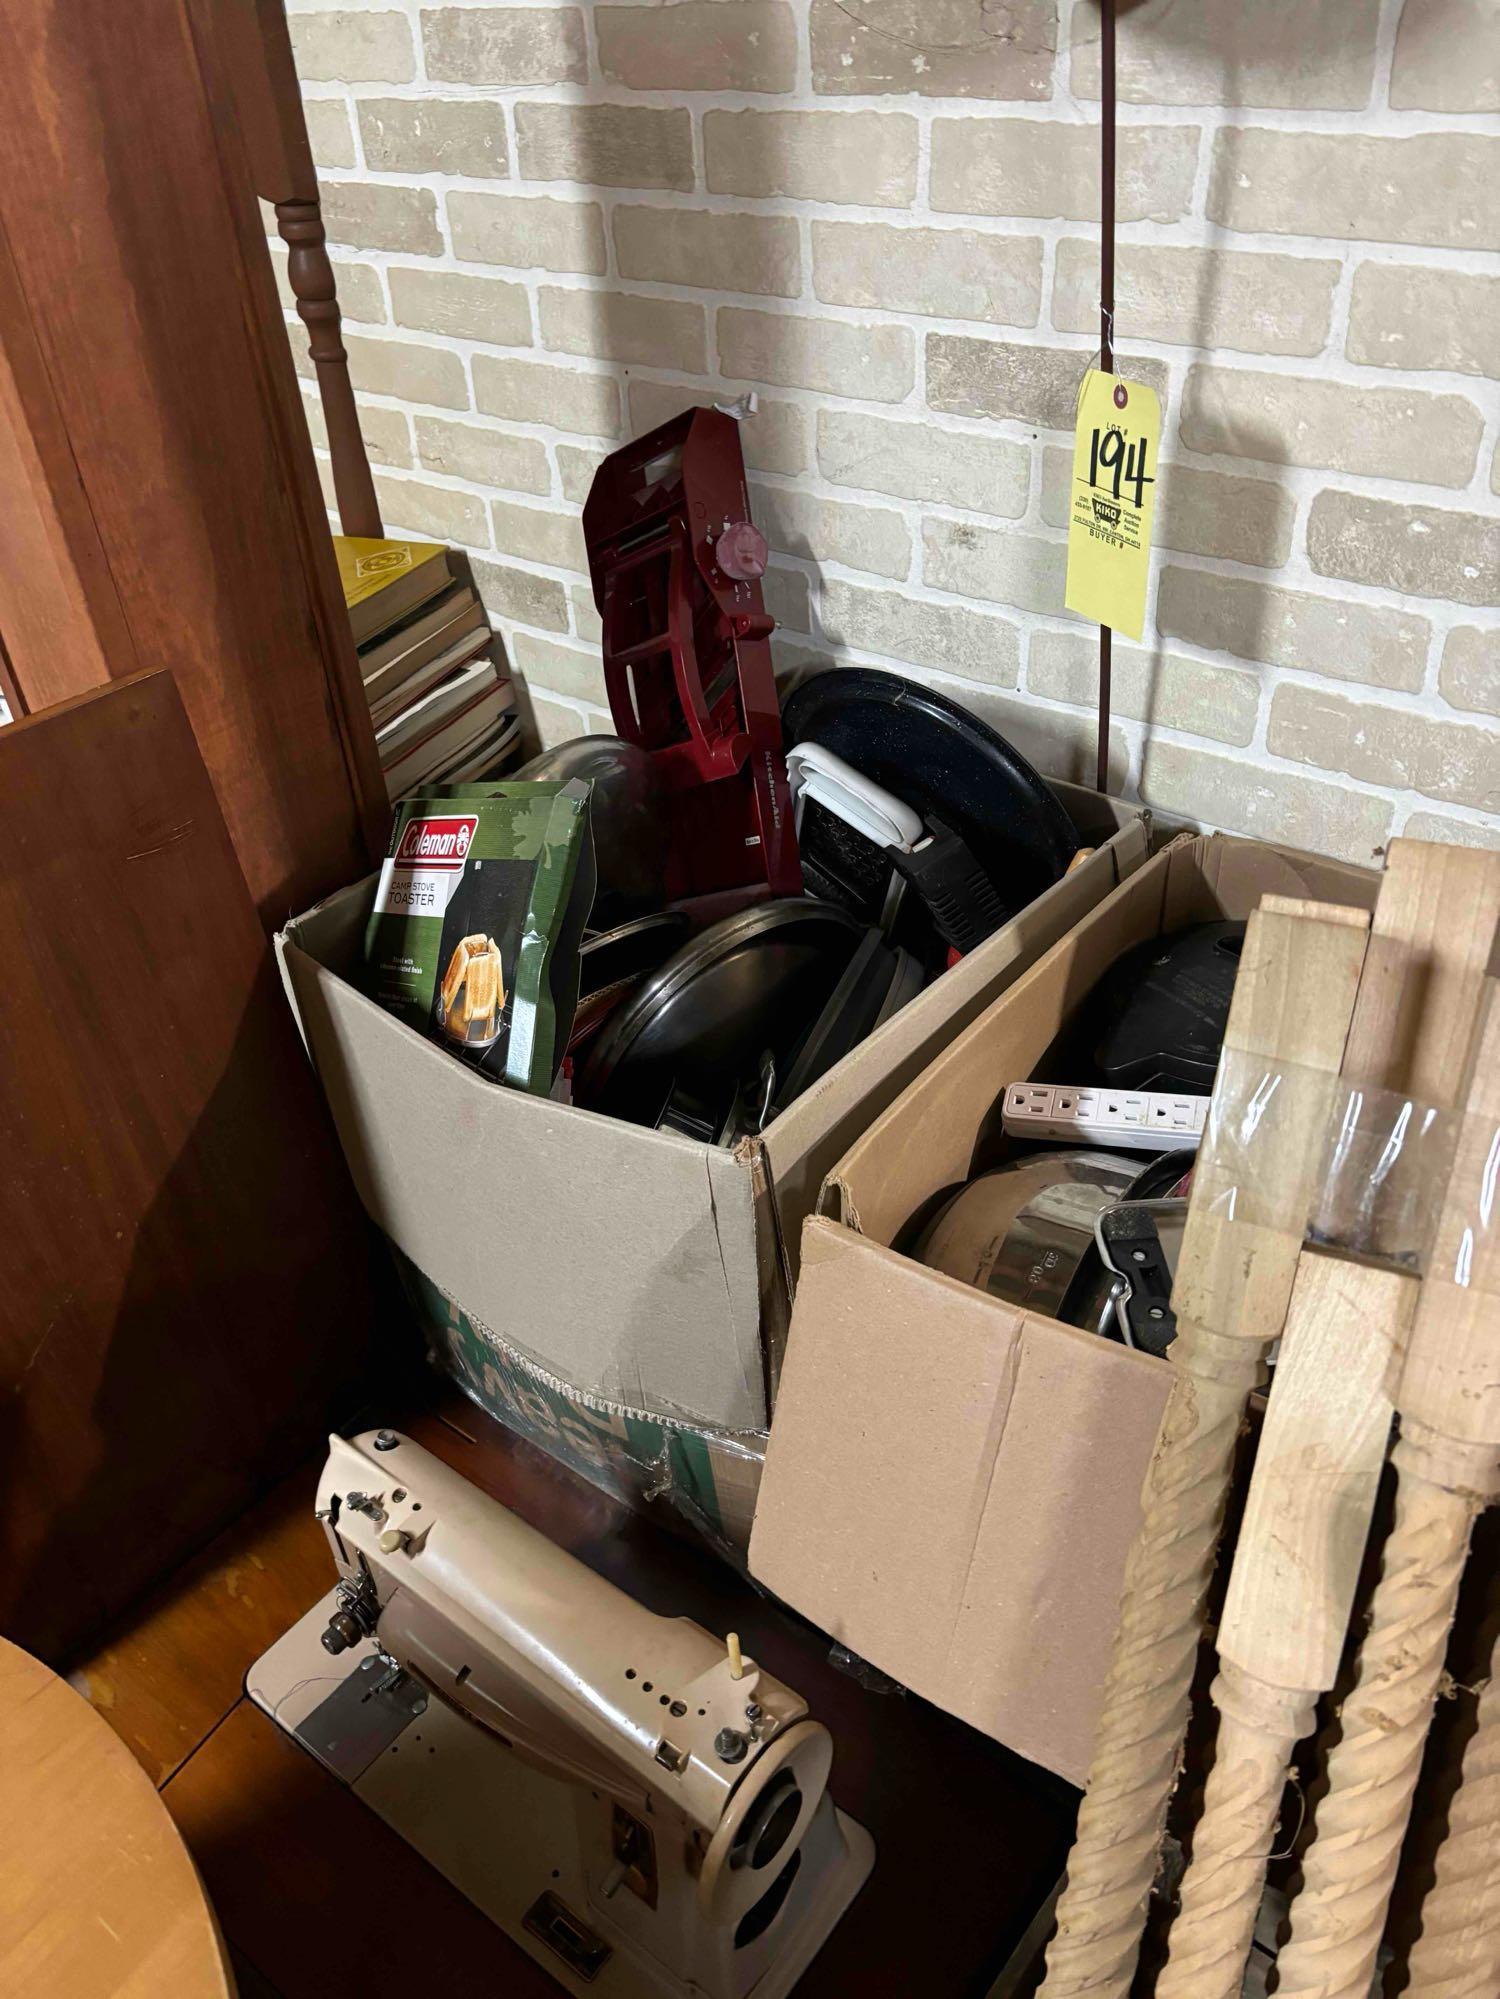 boxes full of kitchenware inc stainless bowls and cookware - sewing machine - noodle maker